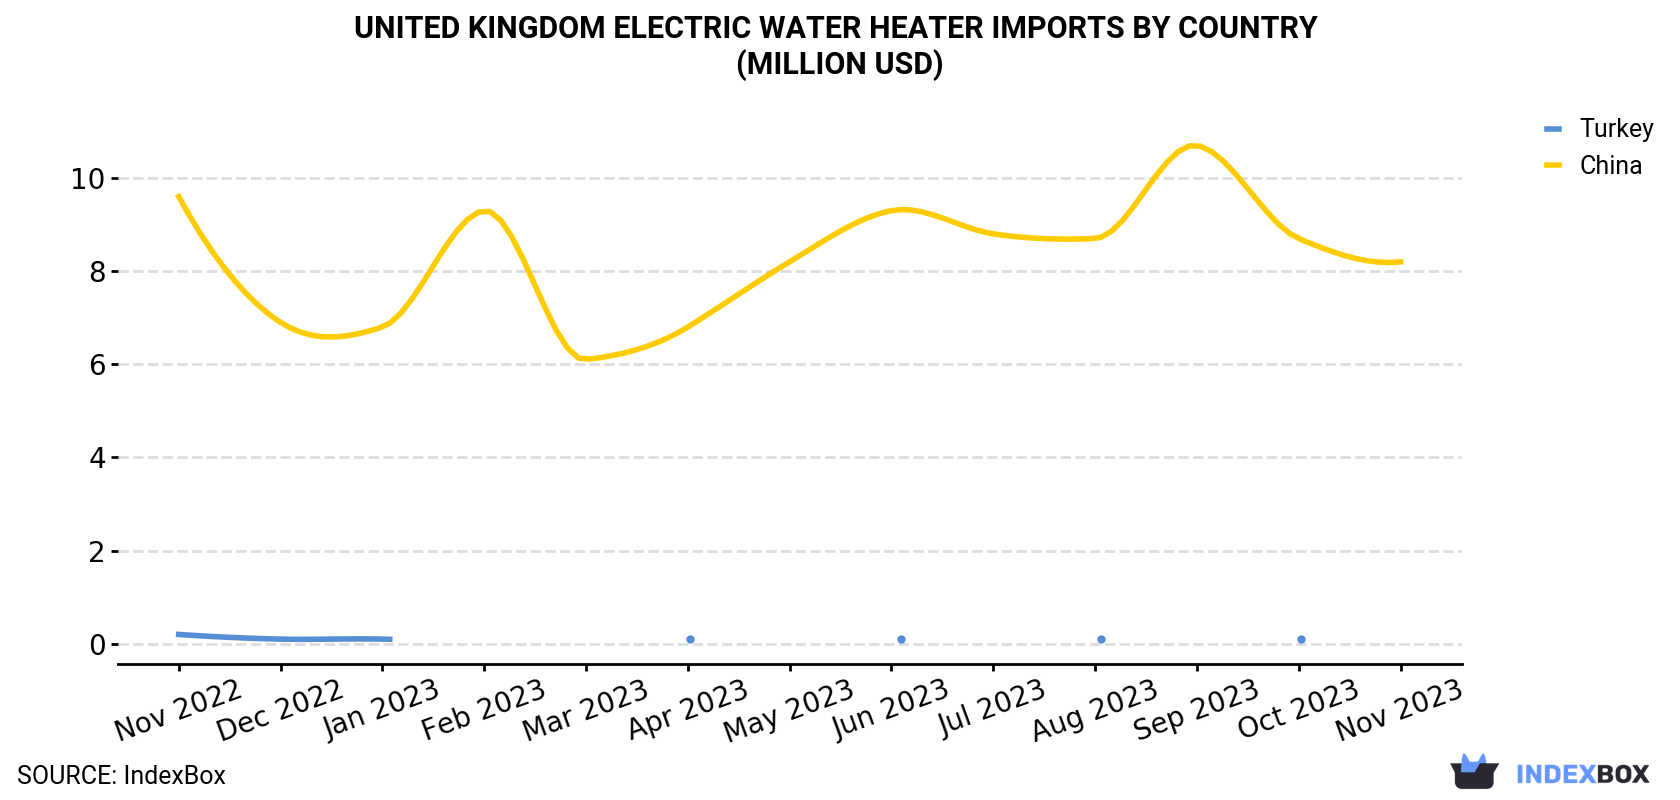 United Kingdom Electric Water Heater Imports By Country (Million USD)